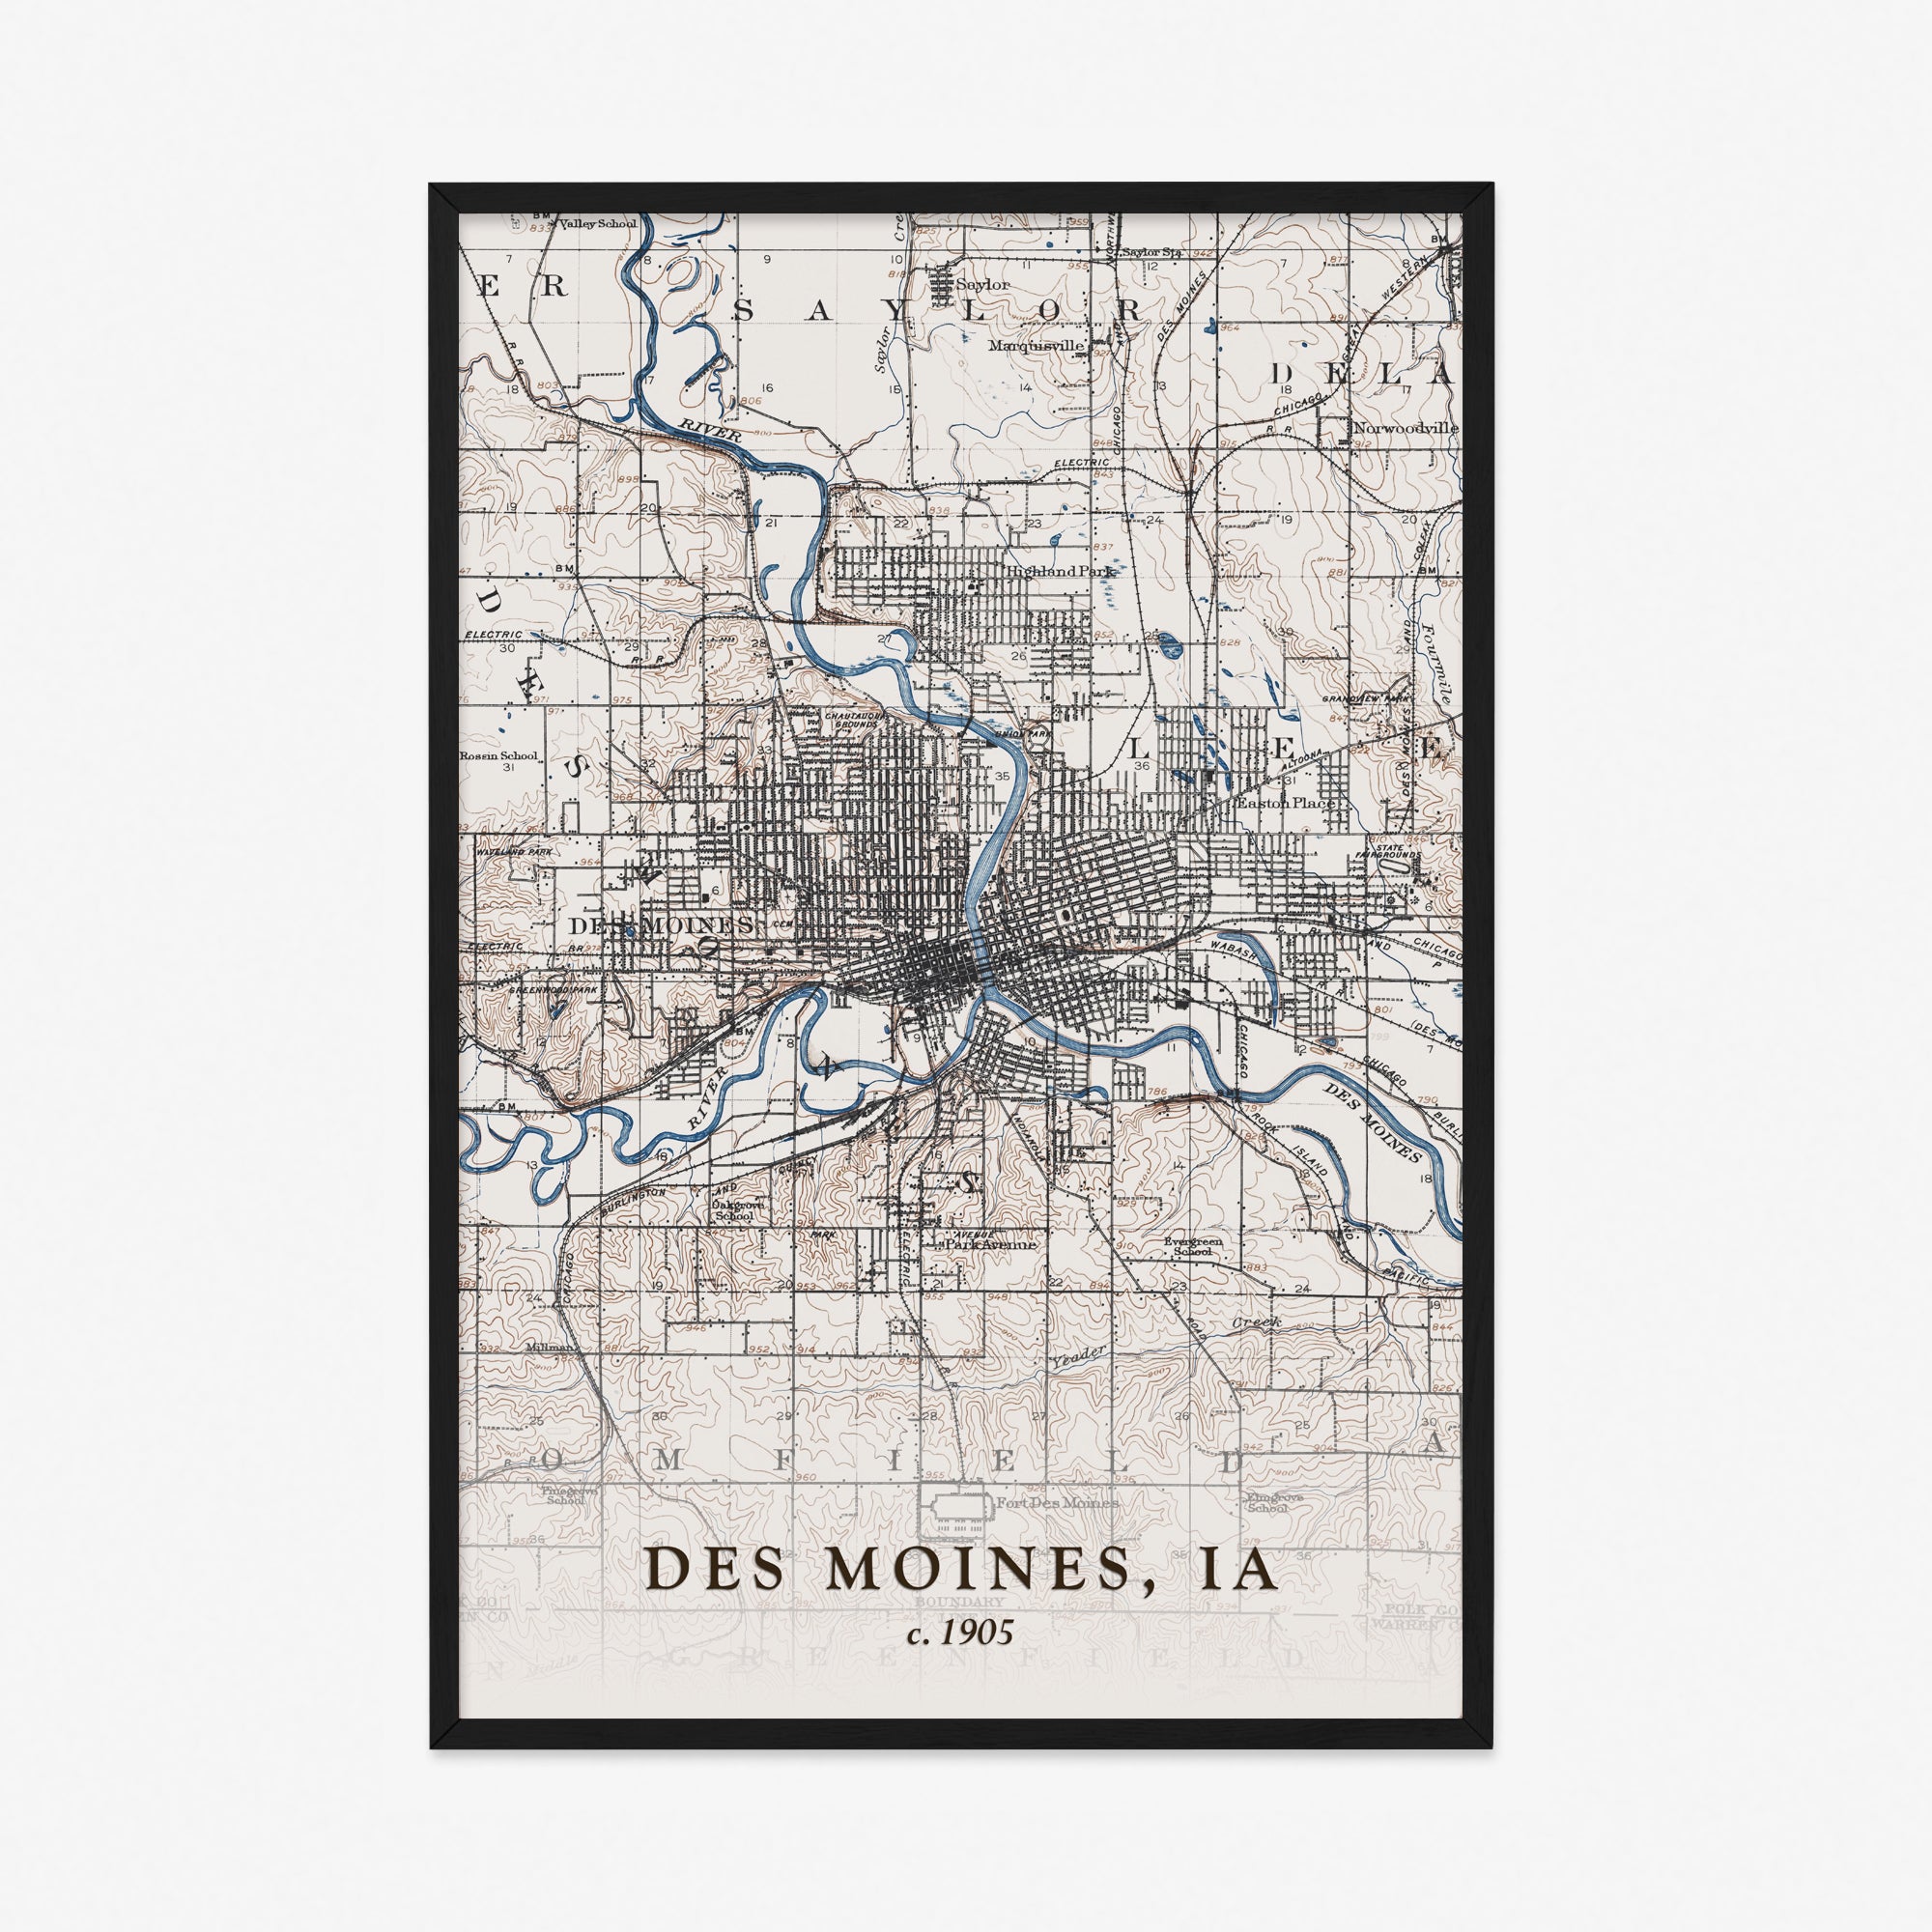 Des Moines, IA - 1905 Topographic Map